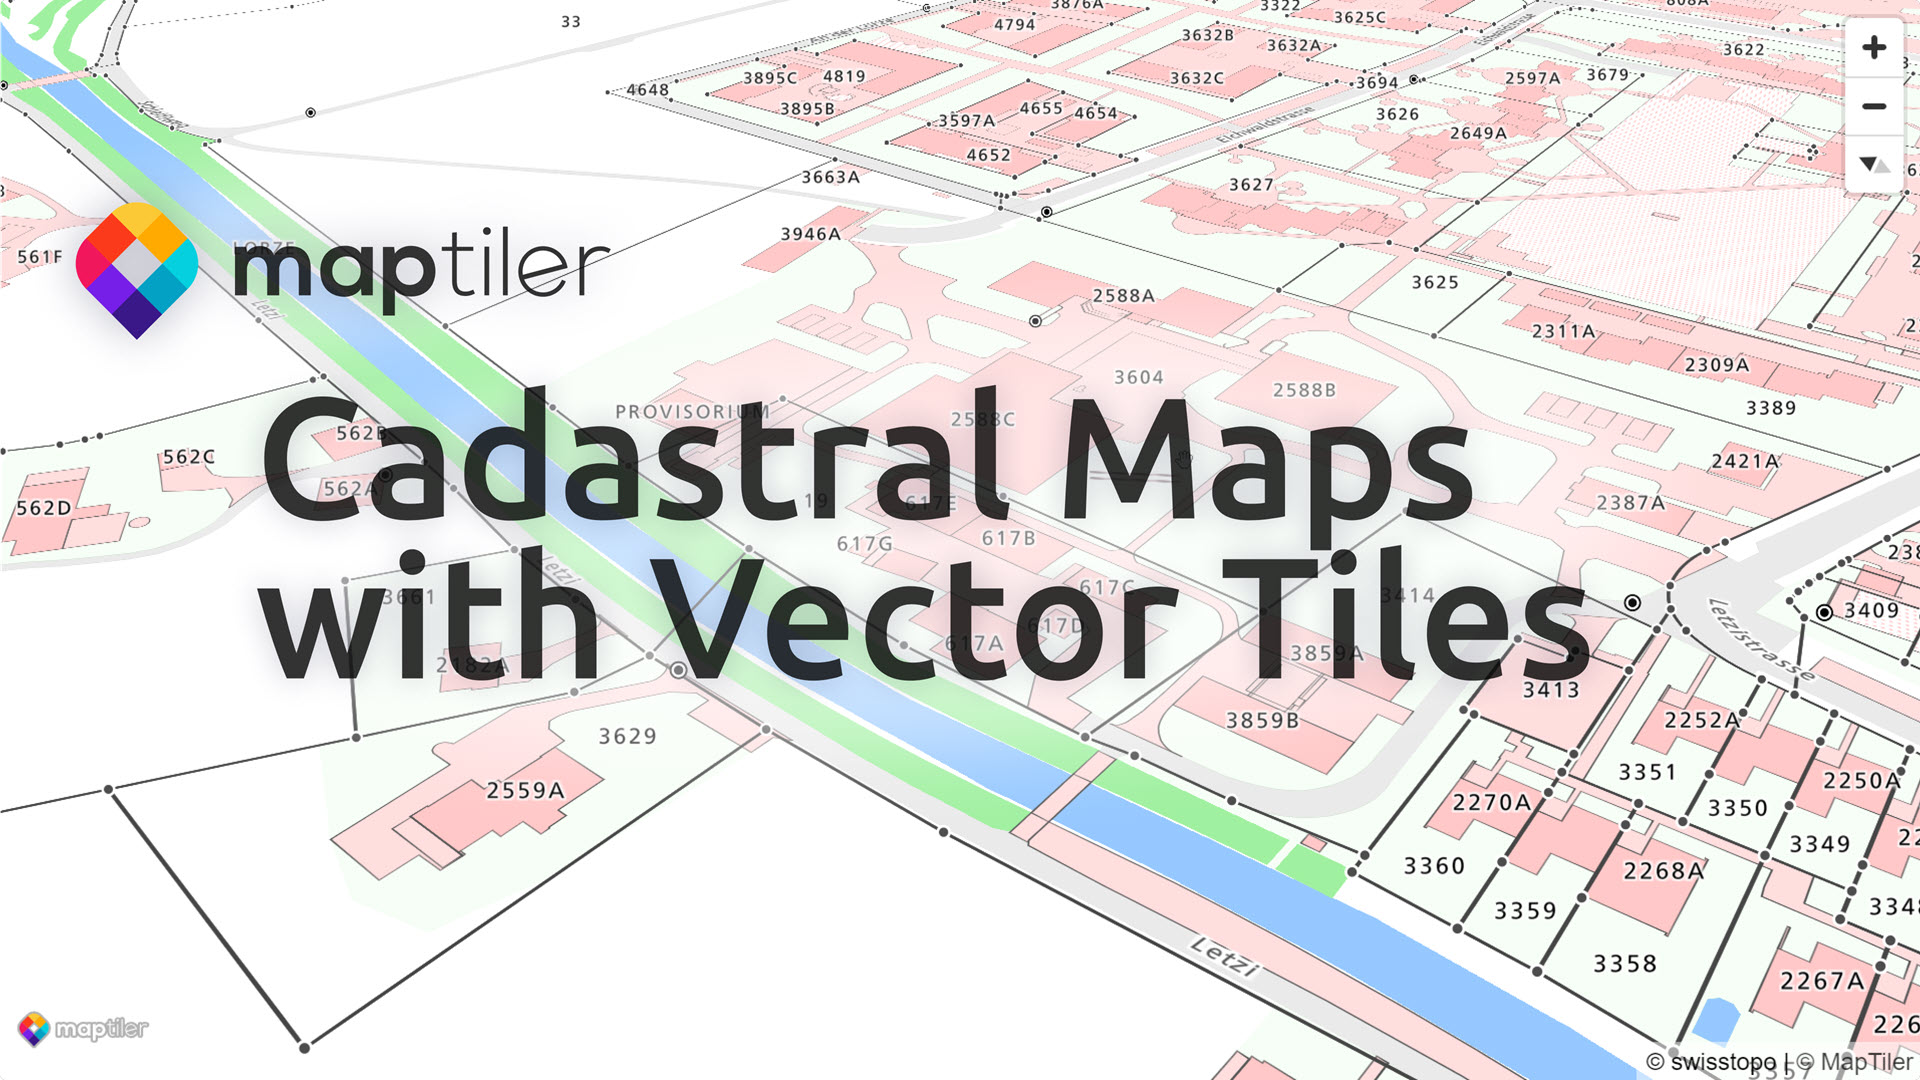 Cadastral maps with vector tiles image